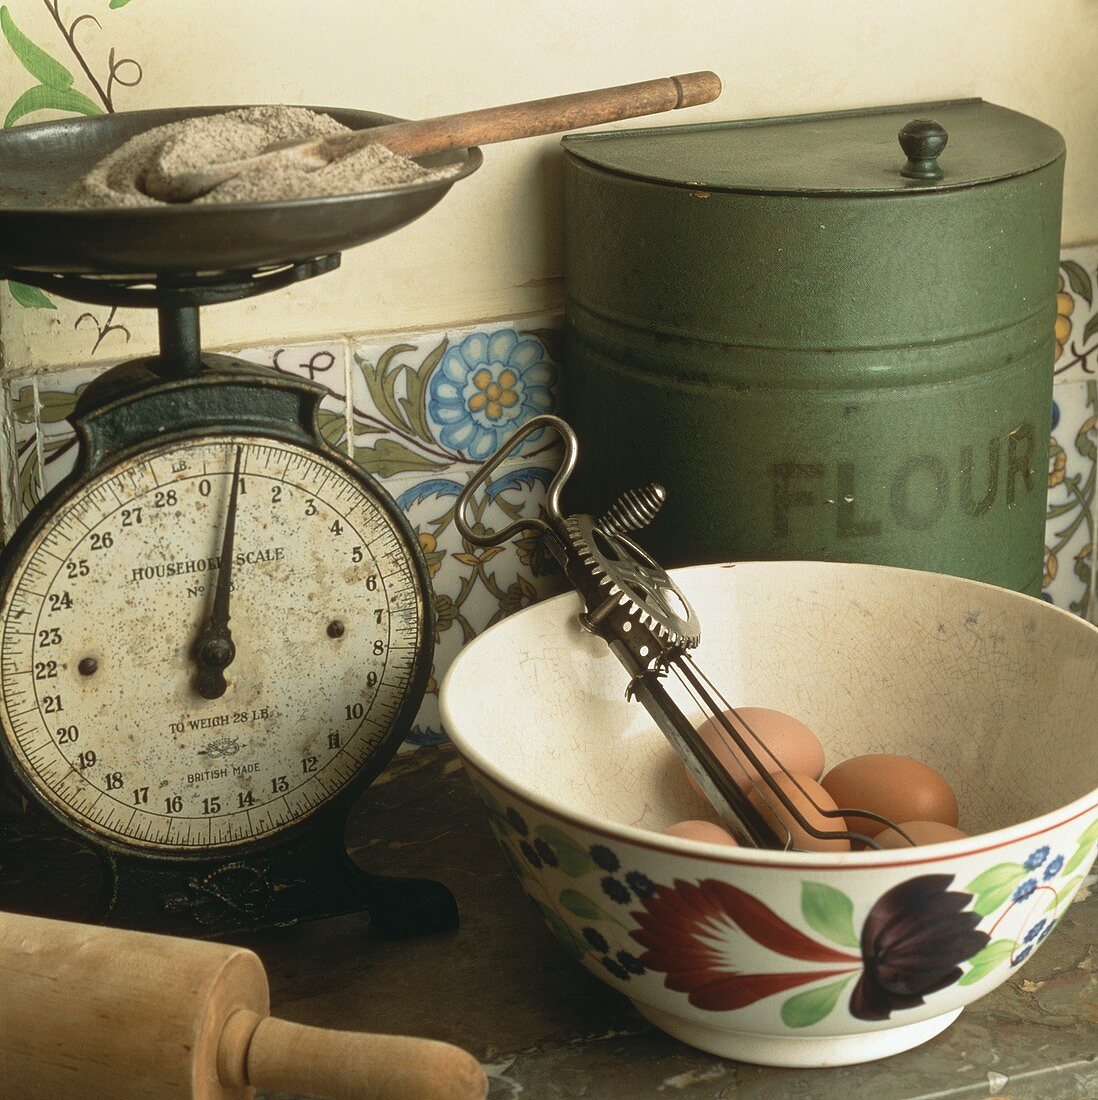 An old pair of kitchen scales with eggs and an old hand mixer